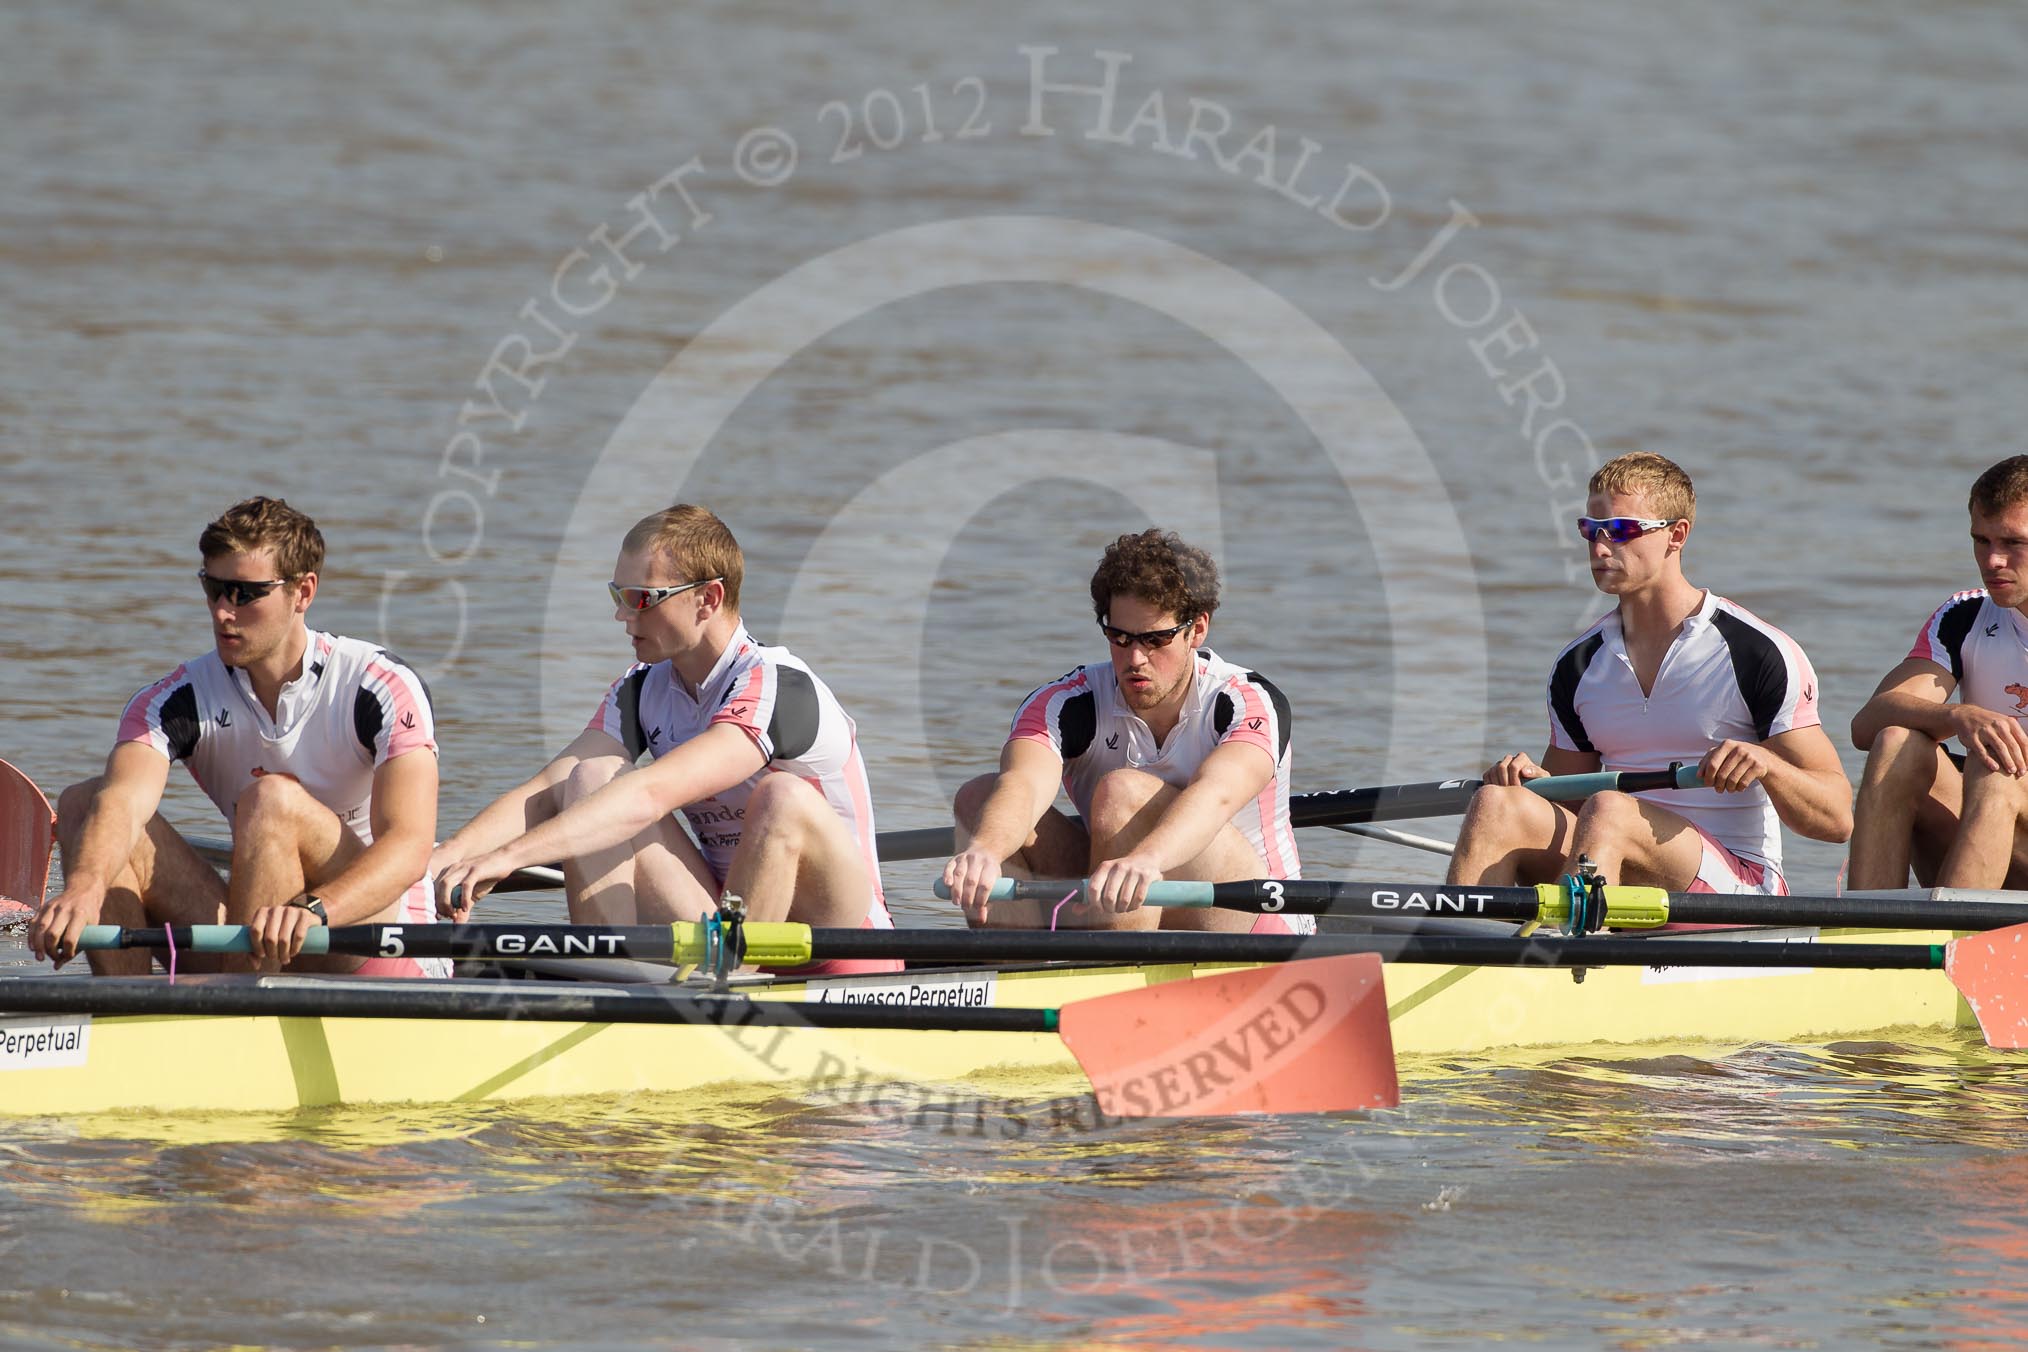 The Boat Race season 2012 - fixture OUBC vs Leander: The Leander Club crew racing OUBC Blue Boat -  Tom Clark, Sam Whittaker, Will Gray, Chris Friend, an bow Nathan Hillyer..




on 24 March 2012 at 13:50, image #61